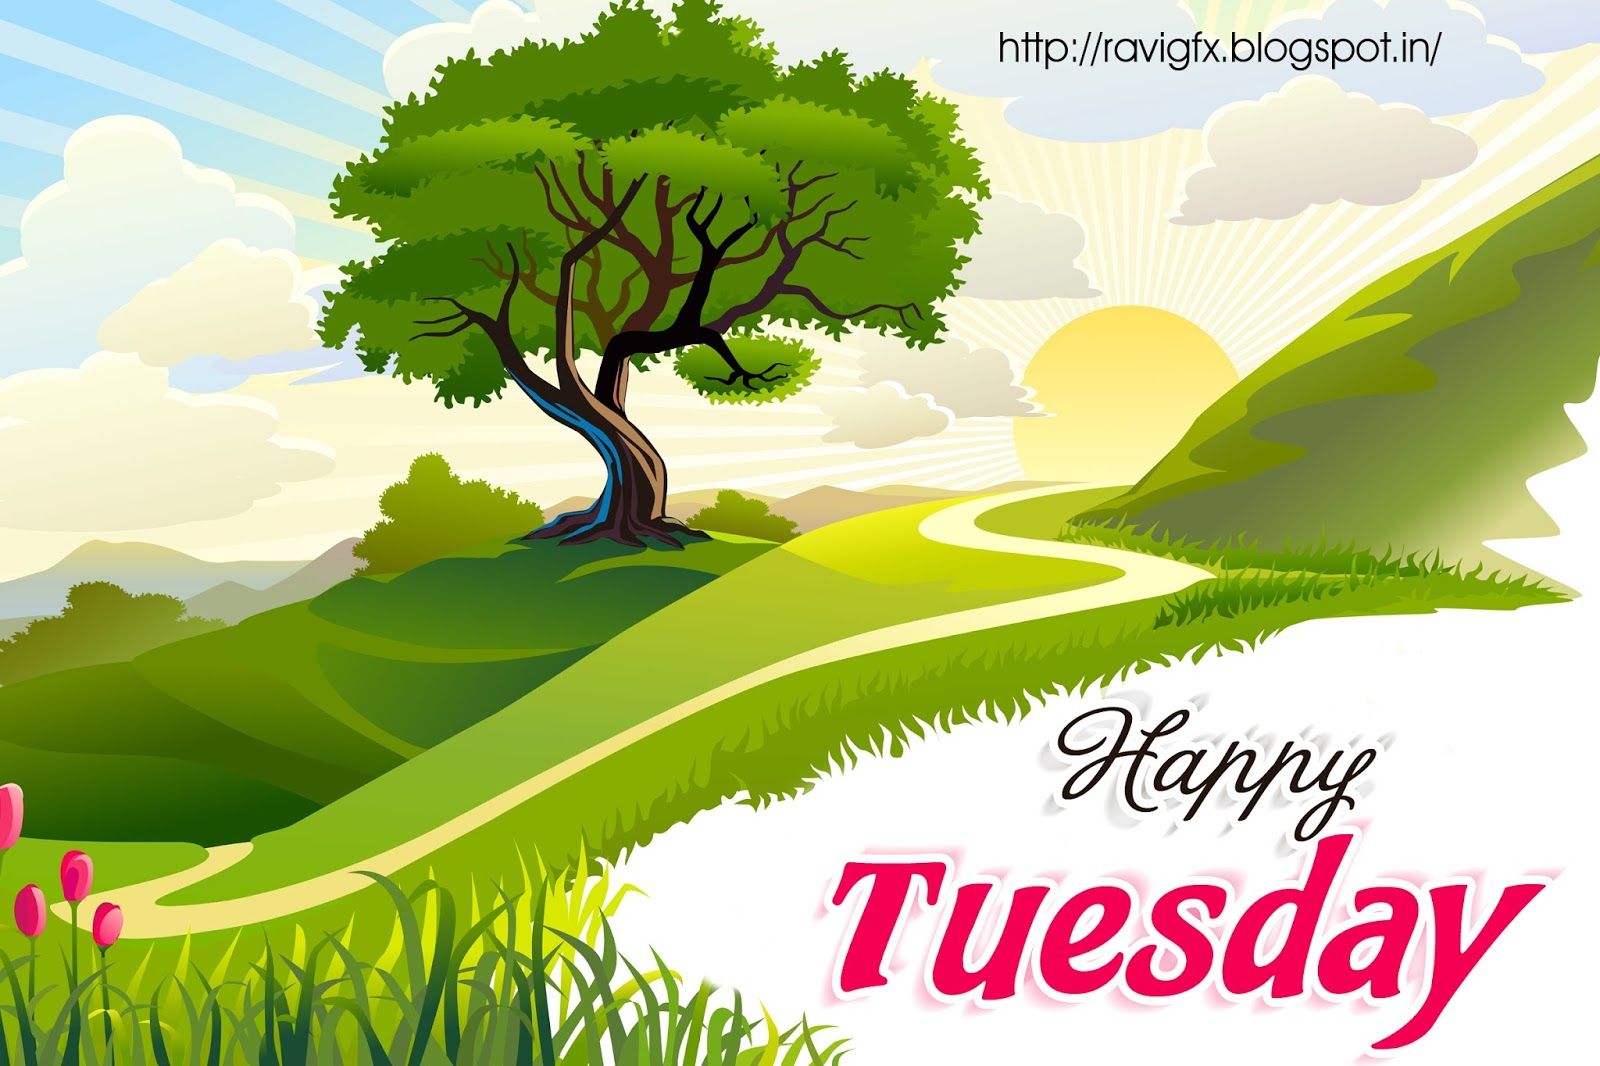 happy tuesday messages sms in English .ravigfx.blogspot.com